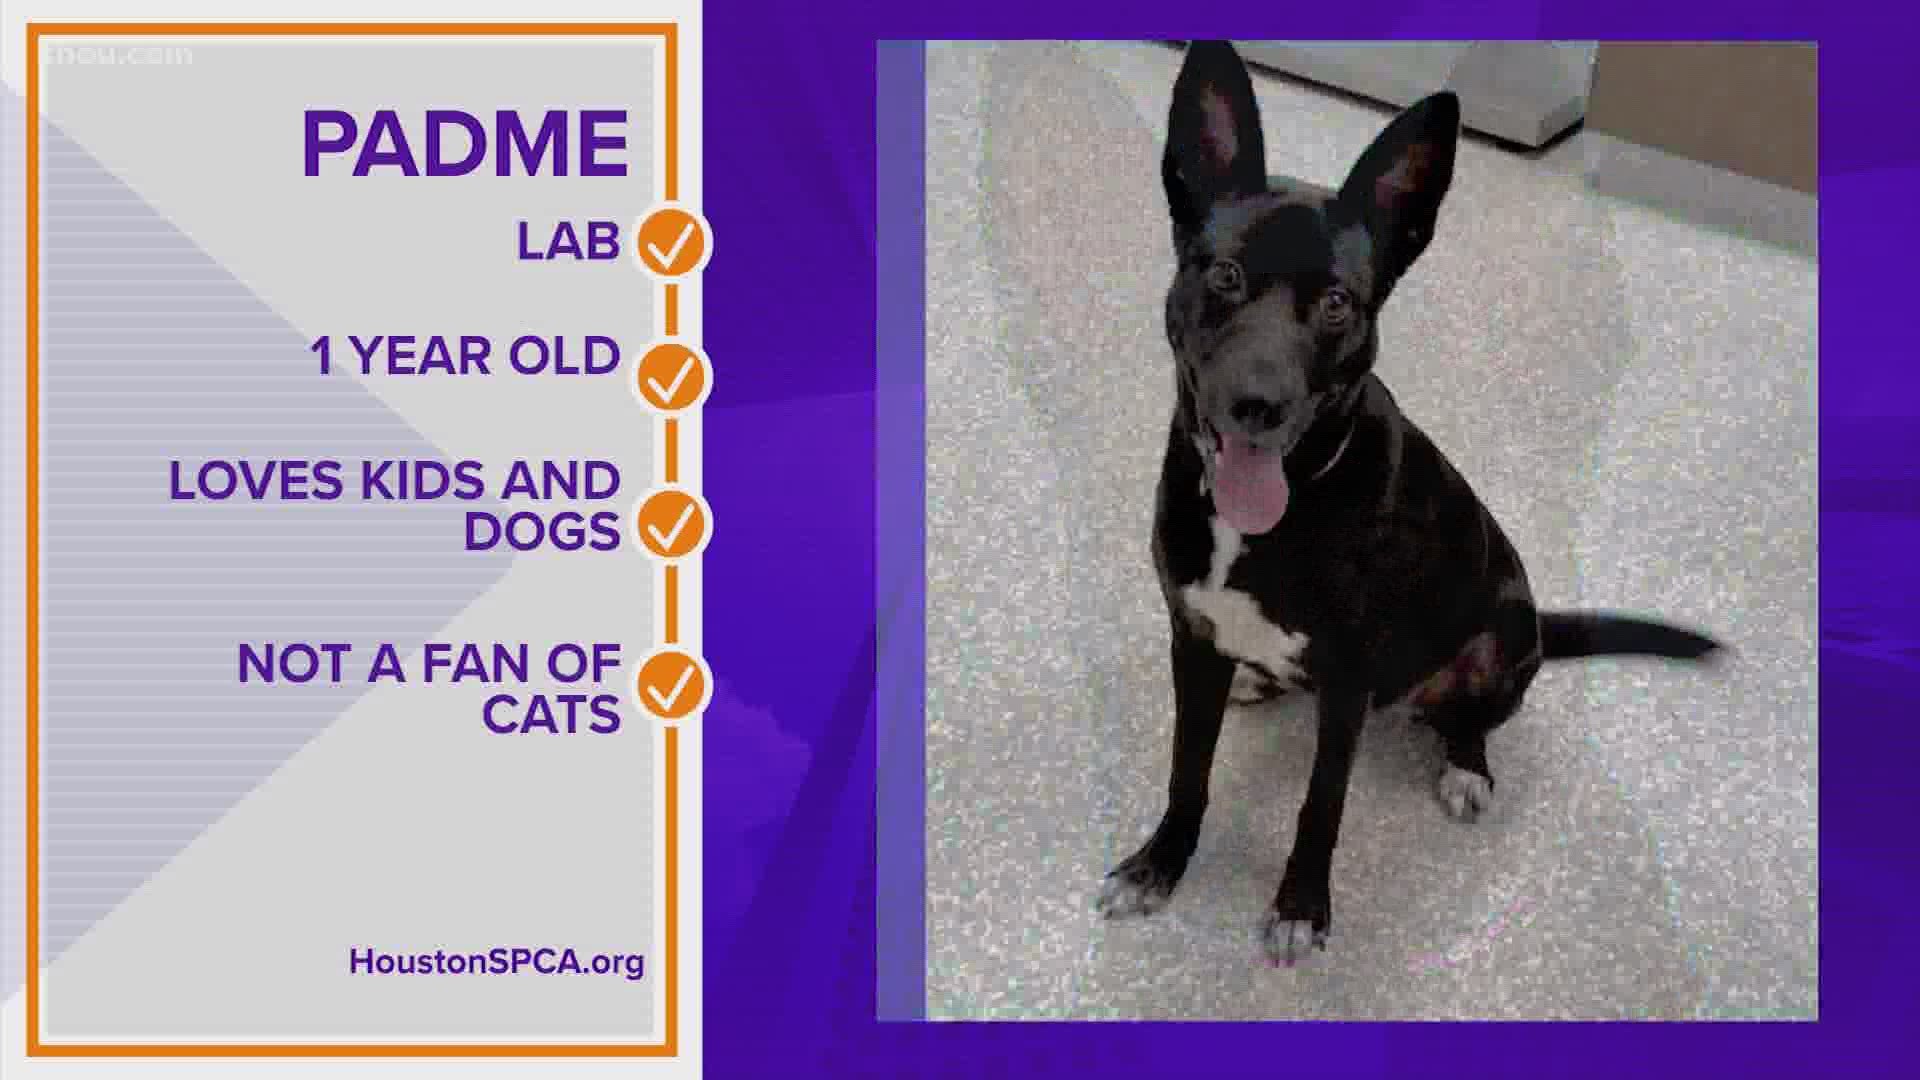 Meet Padme, a sweet pup available for adoption at the Houston SPCA.